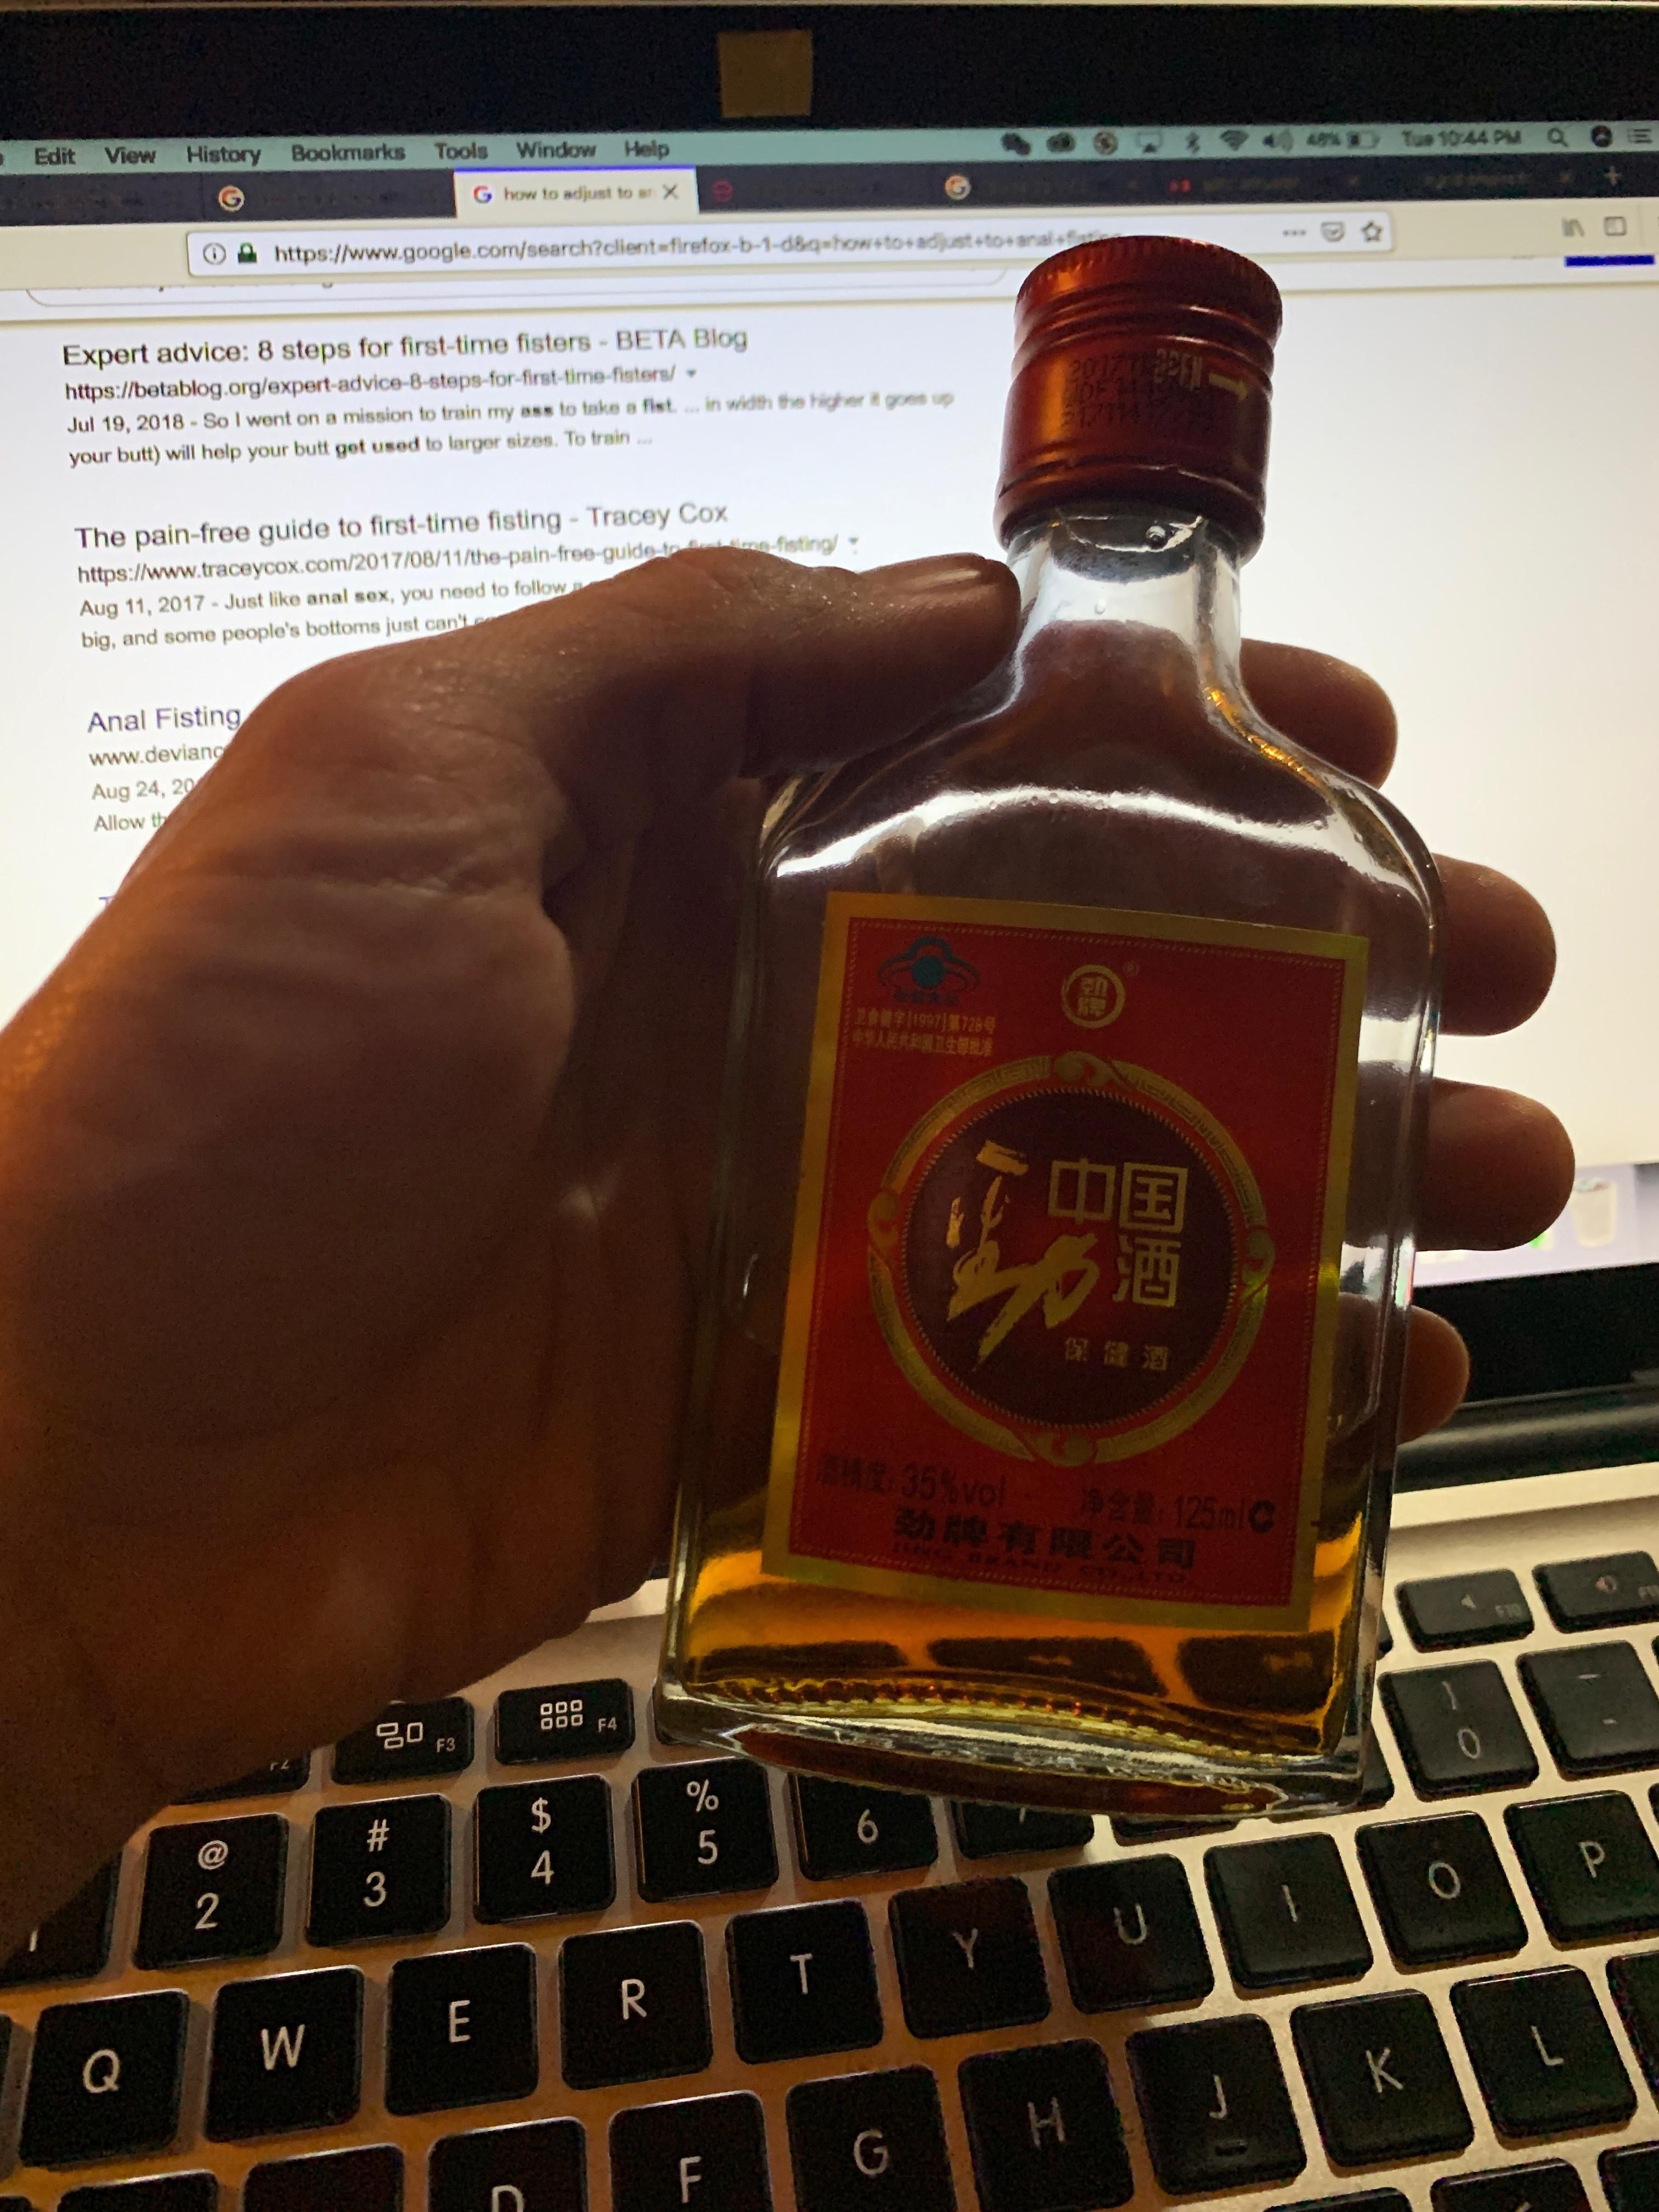 So my buddy was just trying to show us this bottle of liquor his boss bought him...